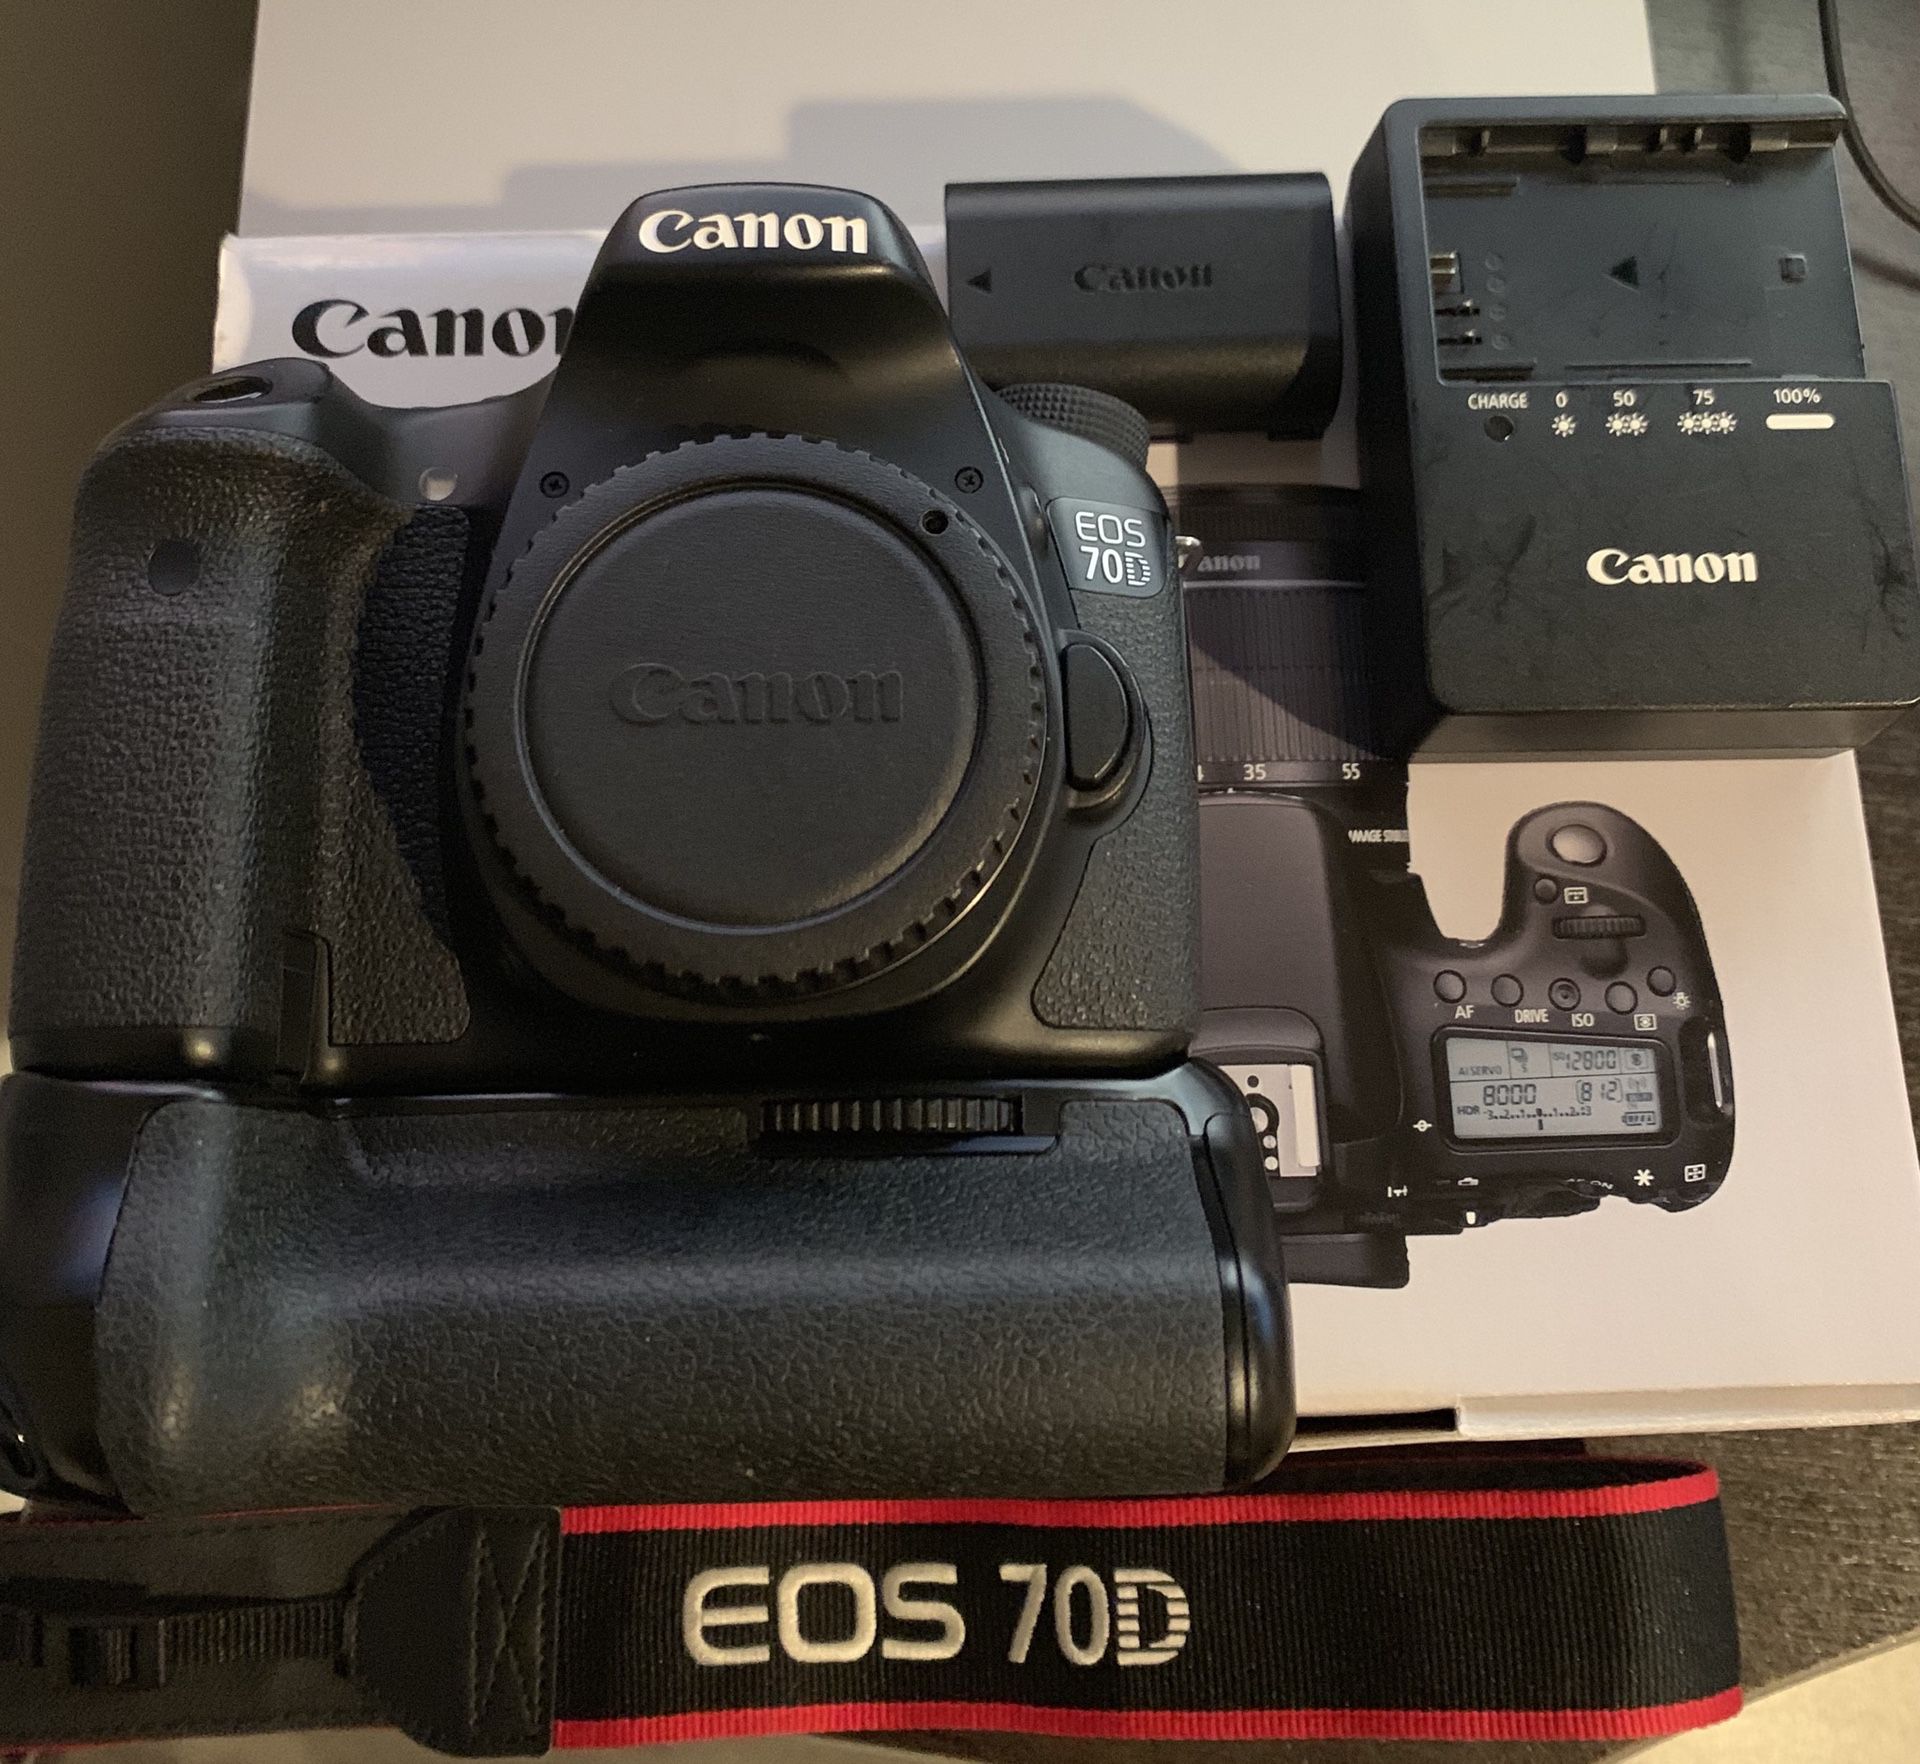 Canon 70D body with battery grip and 18-55mm lens.